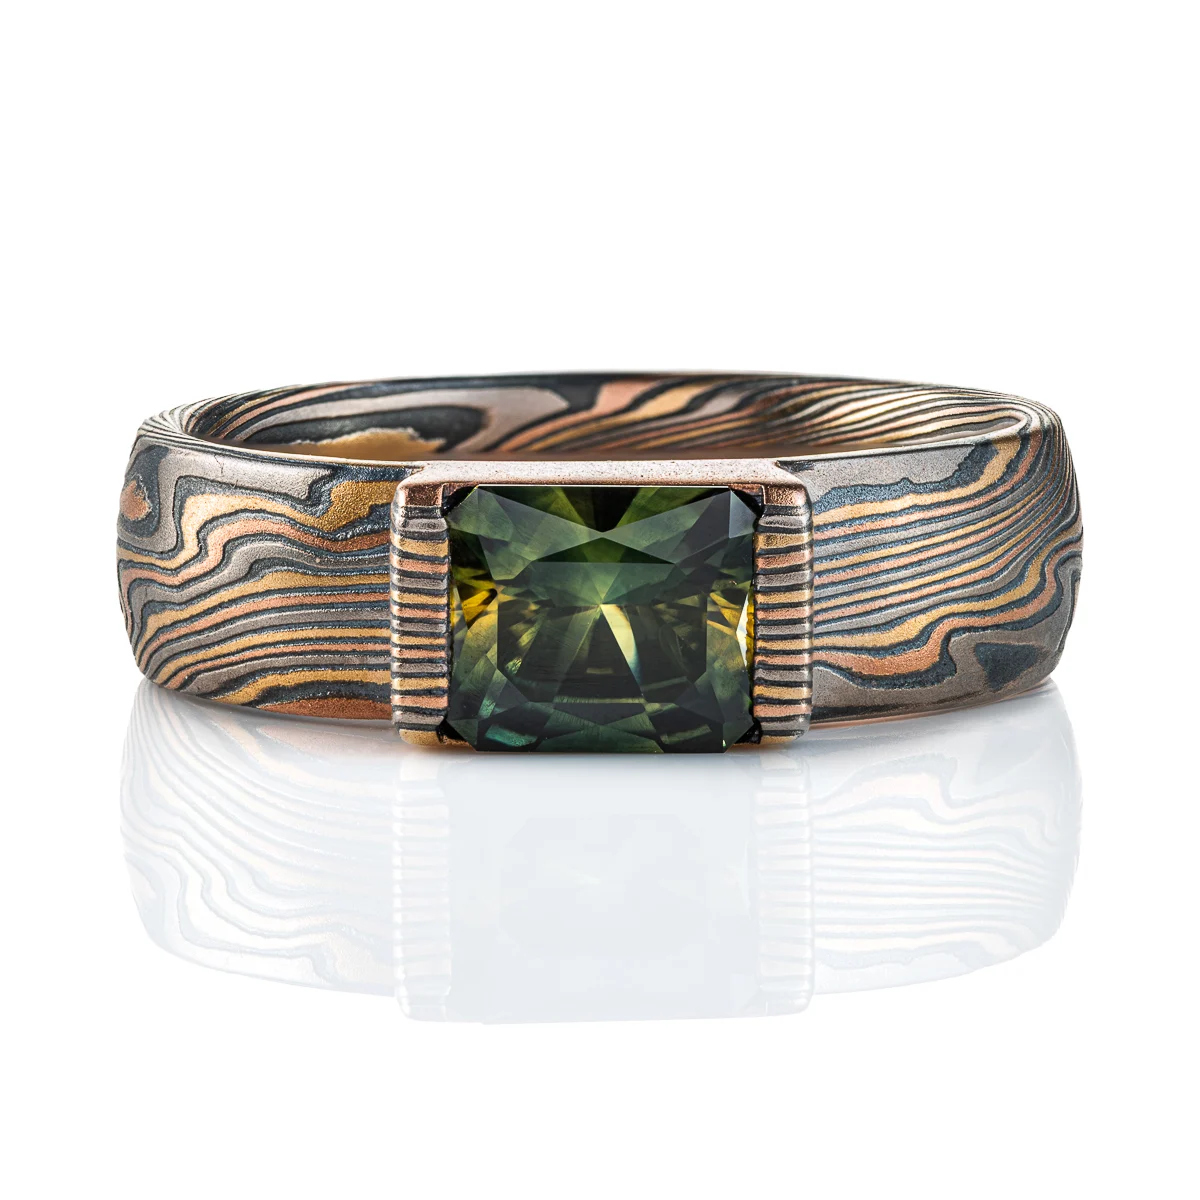 mokume gane ring with multicolored layers of metals, with a large dark green stone set into it